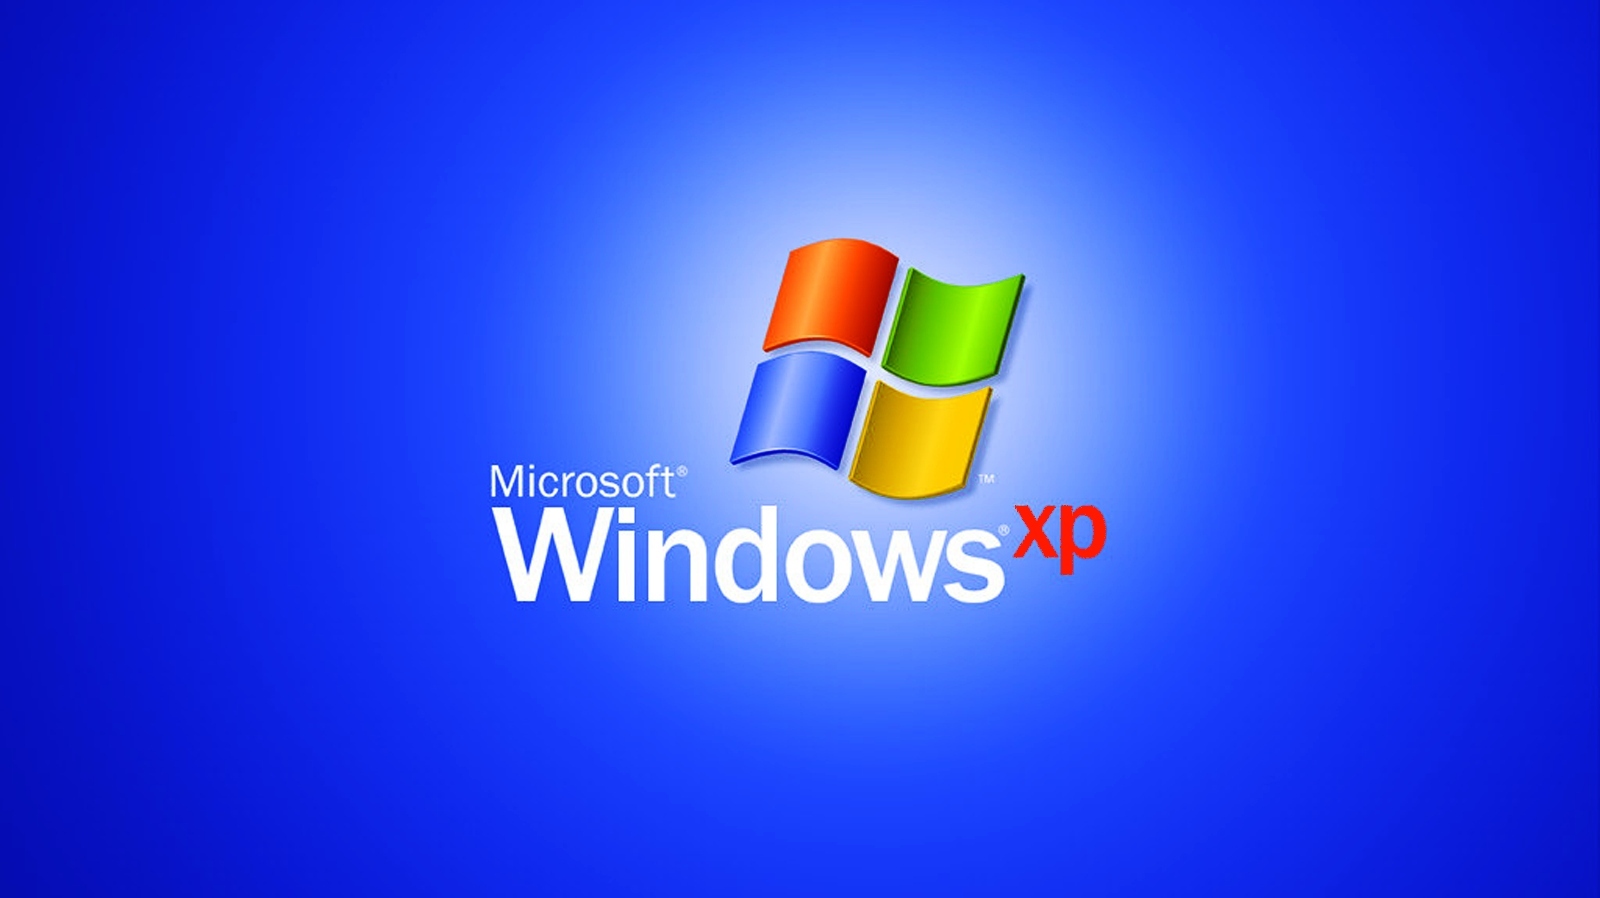 How To Restore Hal.dll From The Windows XP CD